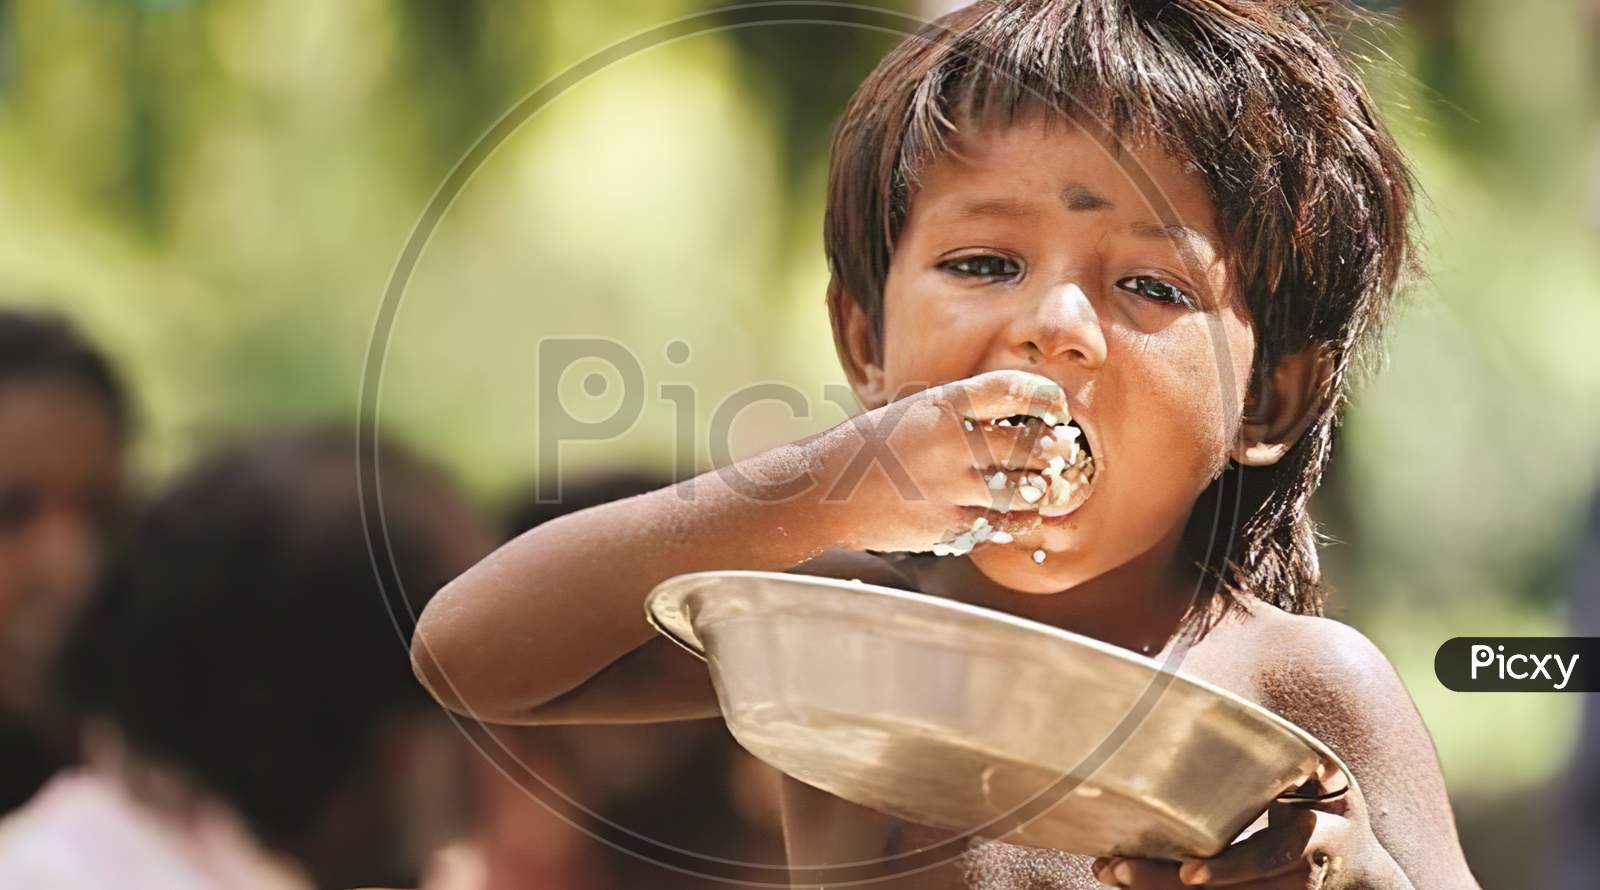 Unidentified poor kid eating food in the street. Poverty in india.